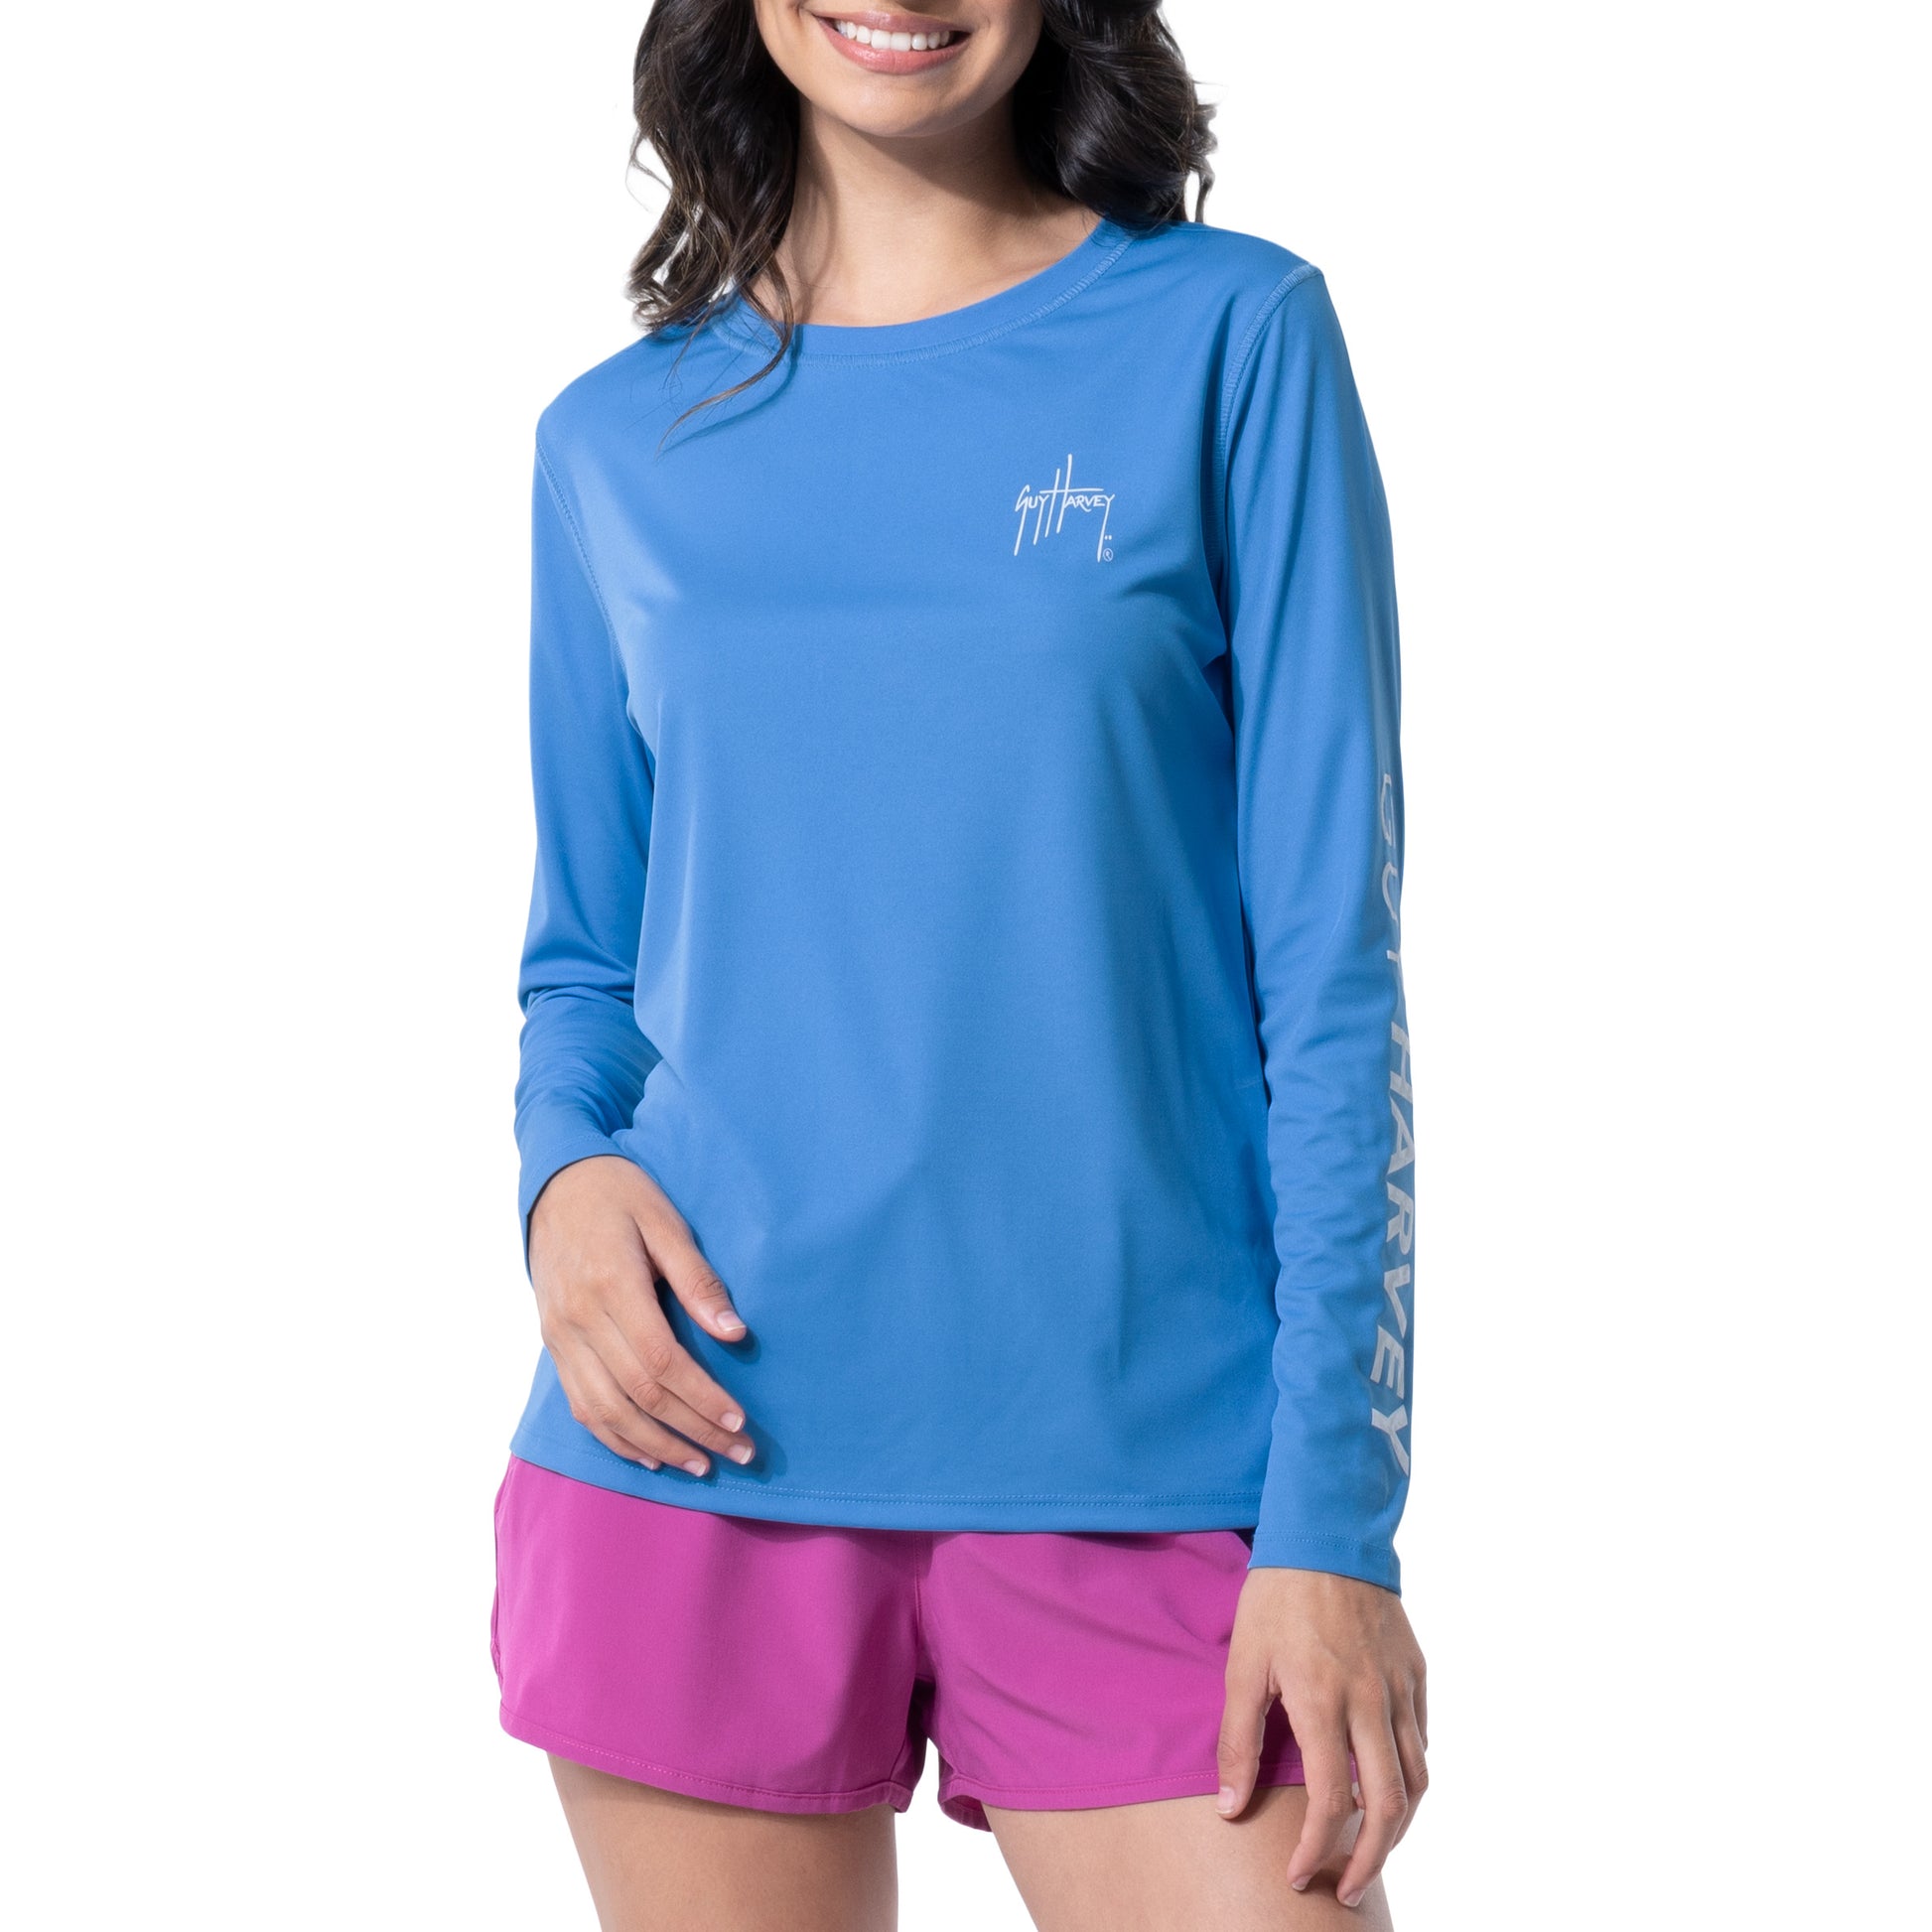 Little Donkey Andy Women's UPF 50+ Breathable Long Sleeve Fishing Shirt, Teal / XS